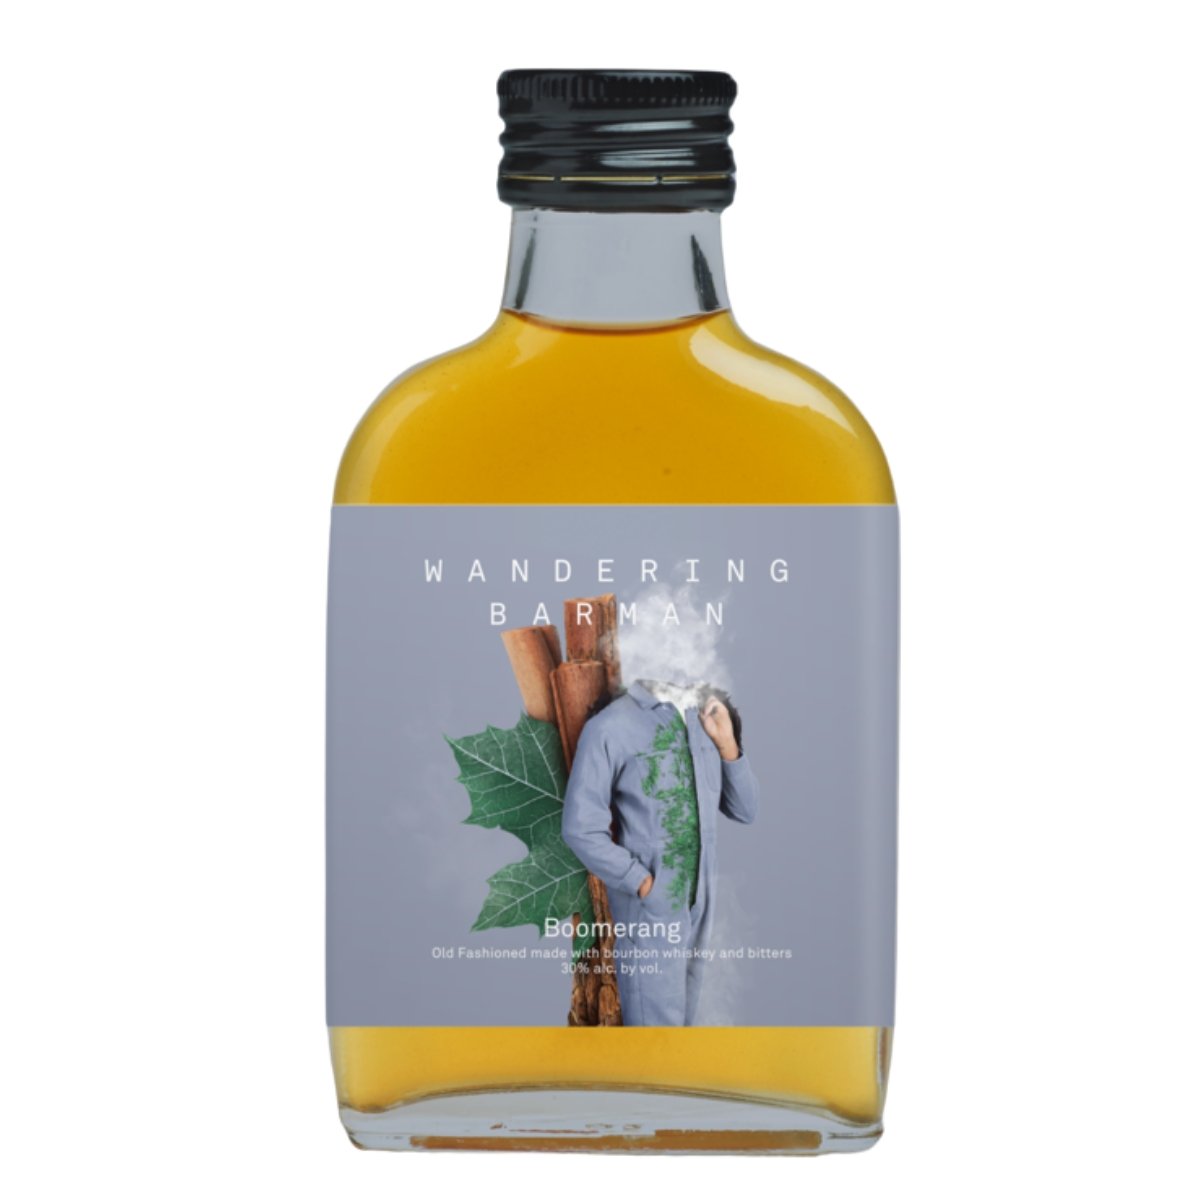 Wandering Barman - 'Boomerang' Old Fashioned Cocktail (100ML) - The Epicurean Trader